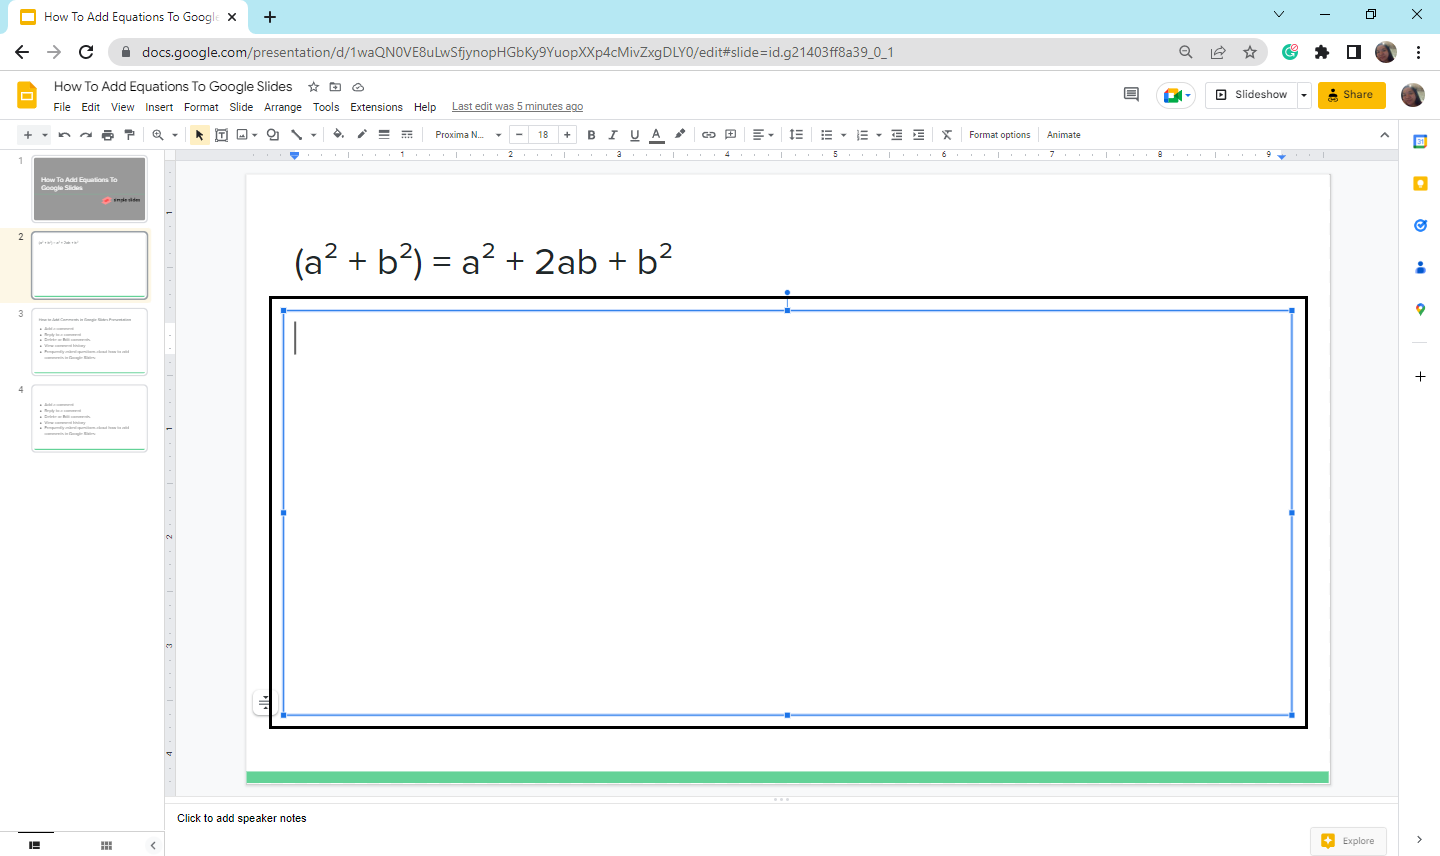 To insert equations in a specific slide, E.g., you want to write equations (fractions form).